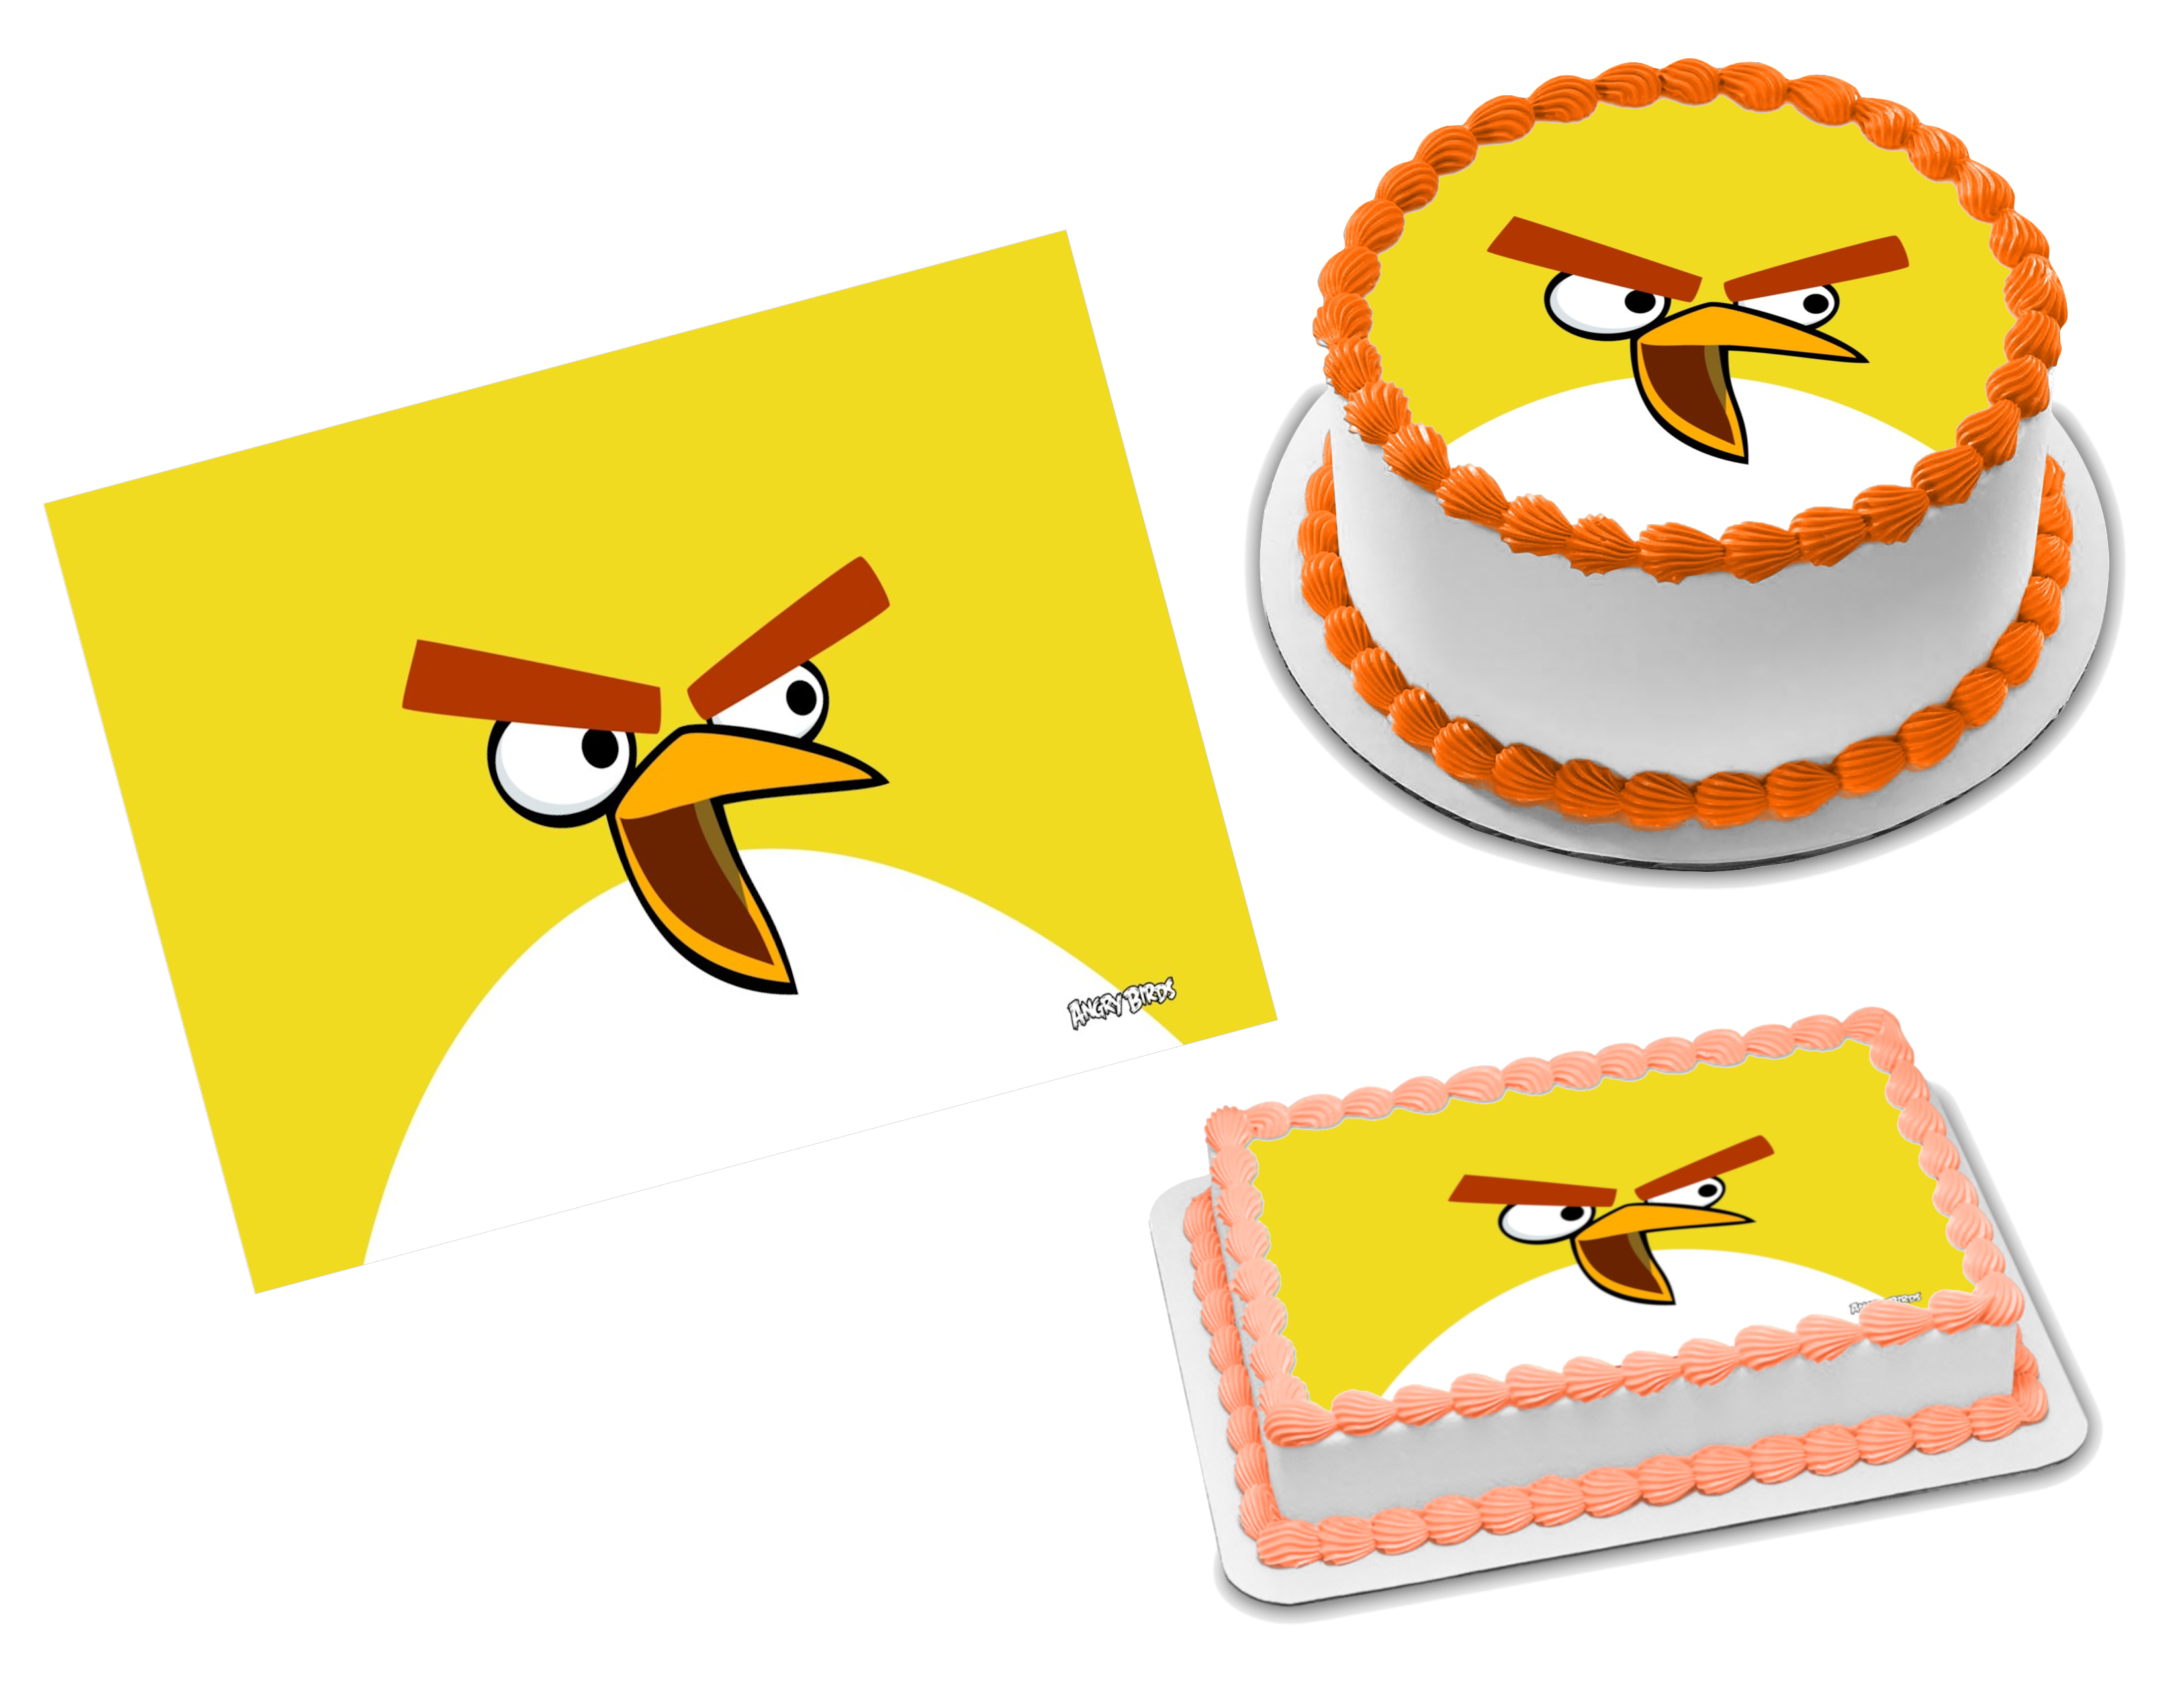 Angry Birds Cake Makes Me Want to Eat and Play Games at the Same Time